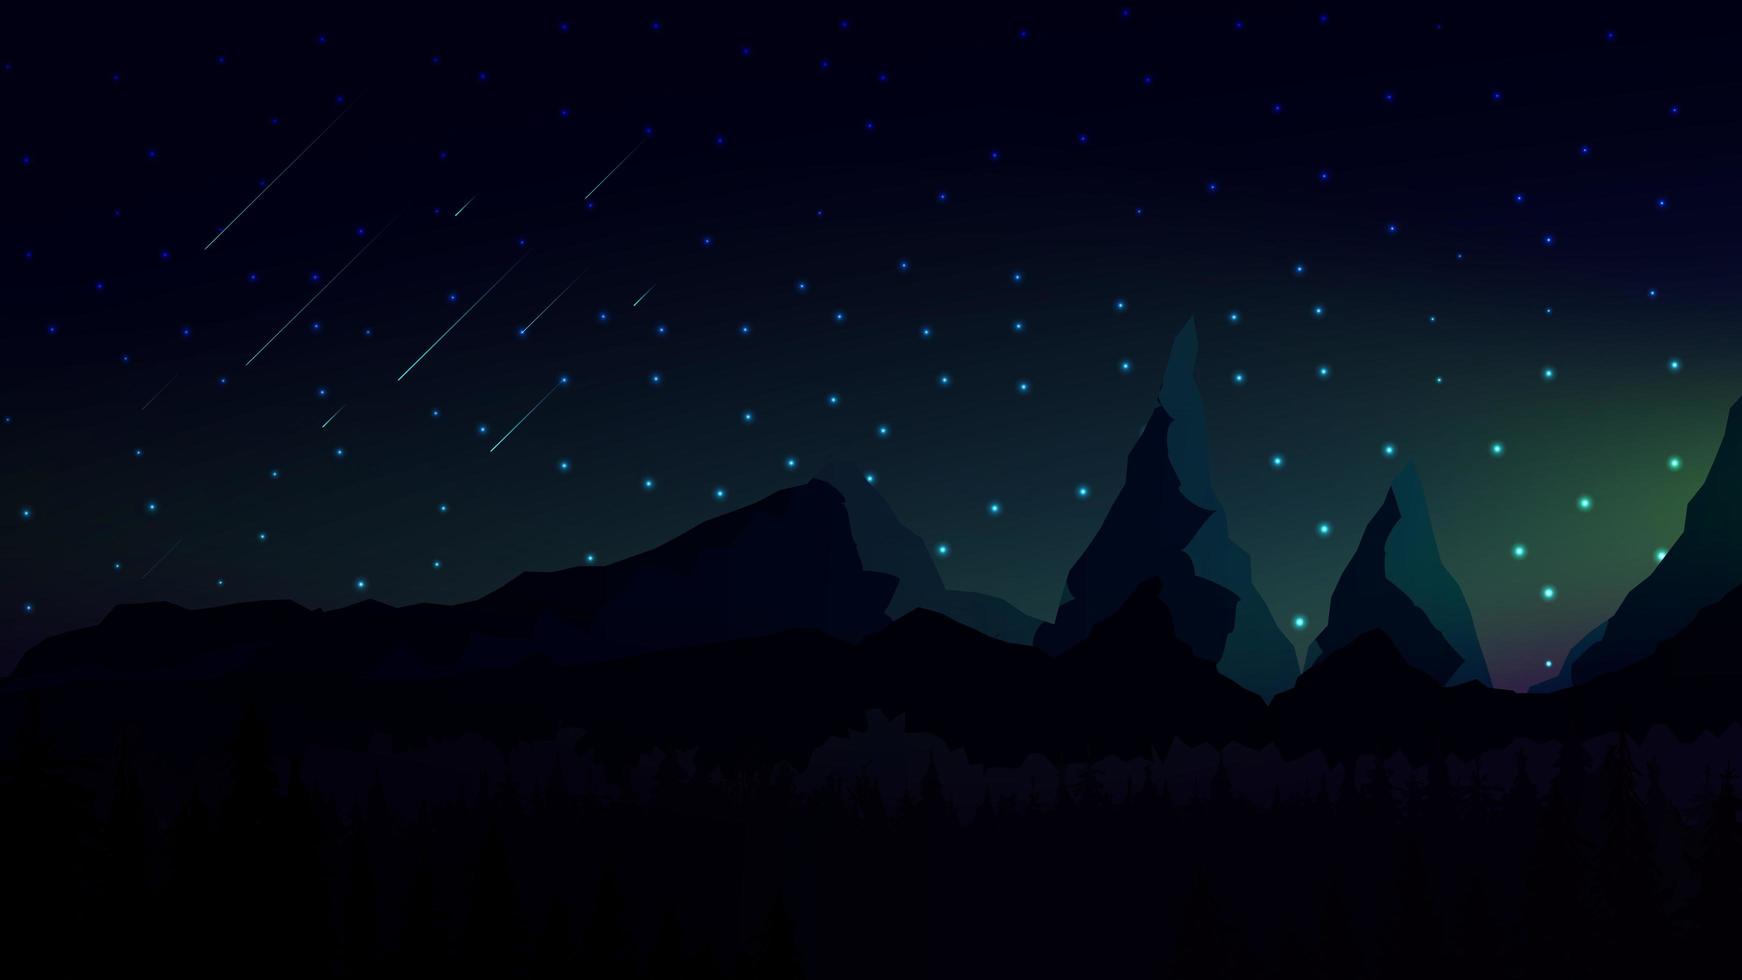 Night dark landscape with mountains  vector